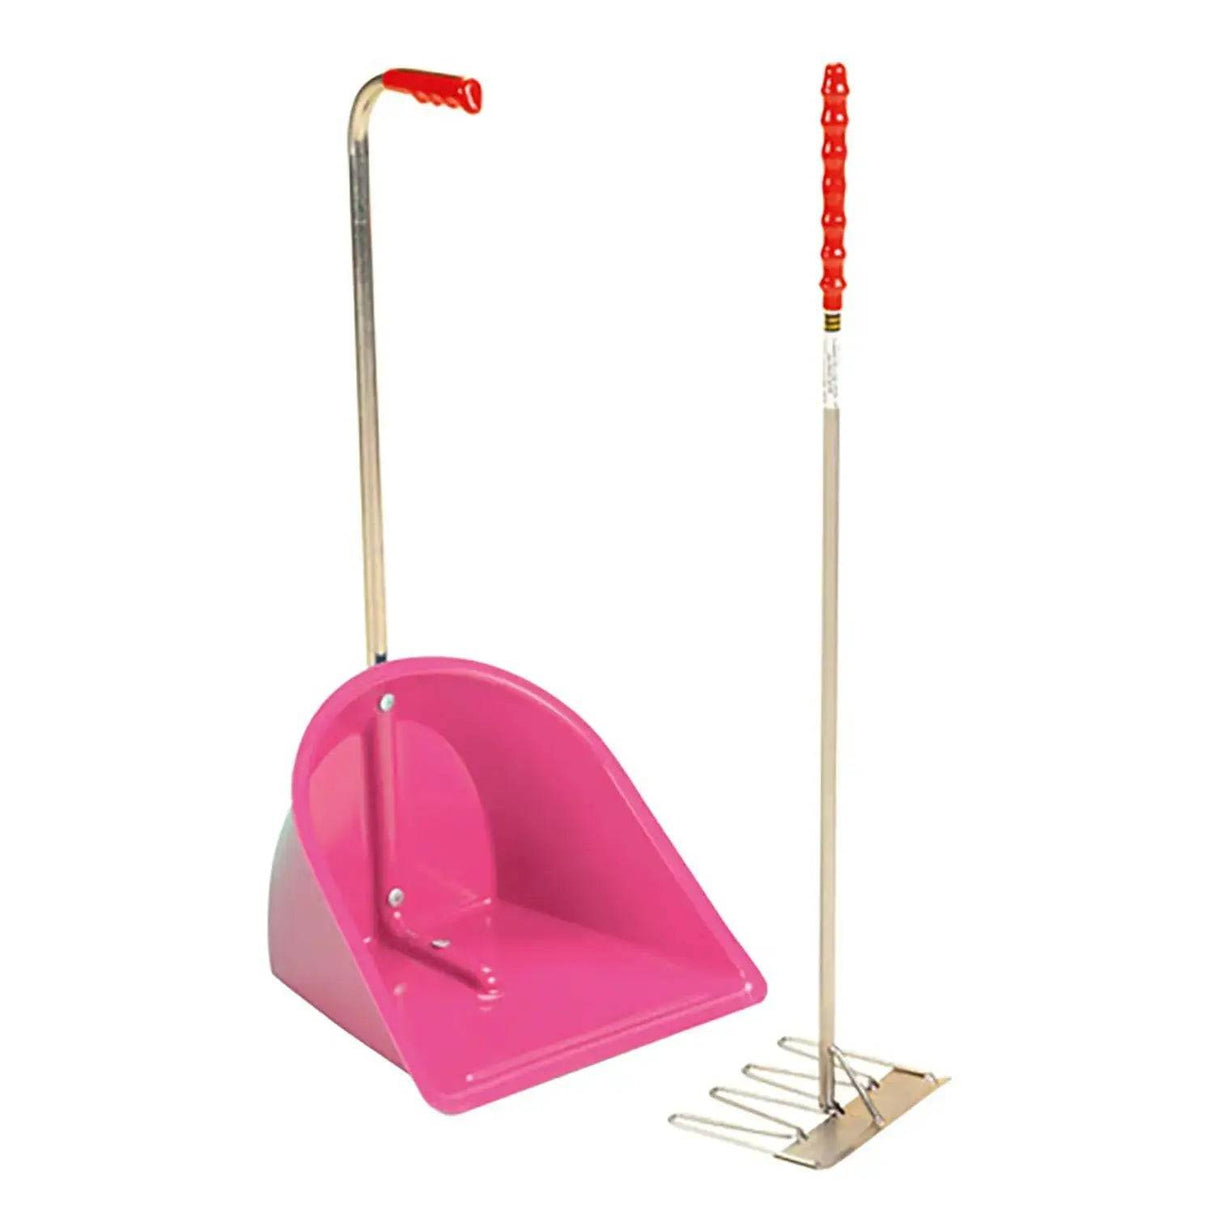 Stubbs Stable Mate Manure Collector With Long Handle Rake (S4585) Mucking Out Pink Barnstaple Equestrian Supplies